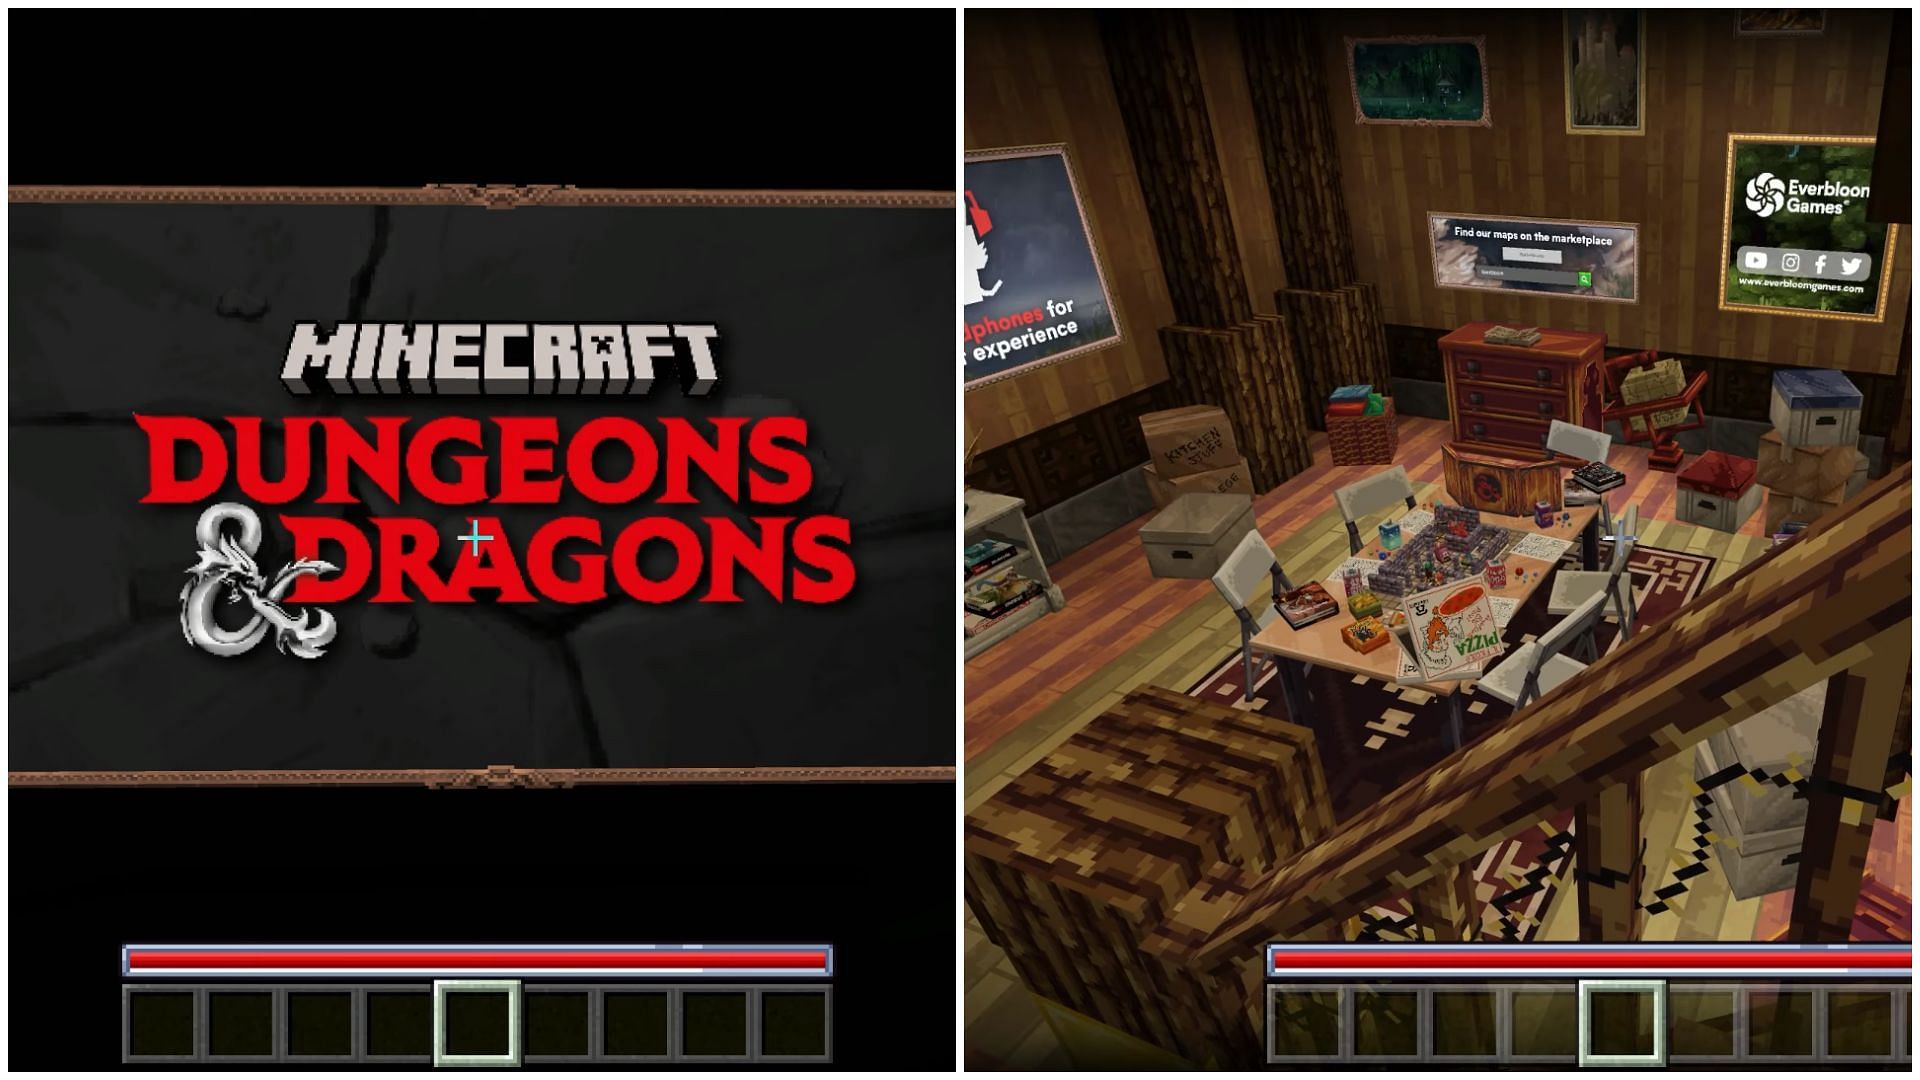 The Minecraft Dungeons &amp; Dragons DLC will come with a world and 12 new skins to wear (Image via Sportskeeda)